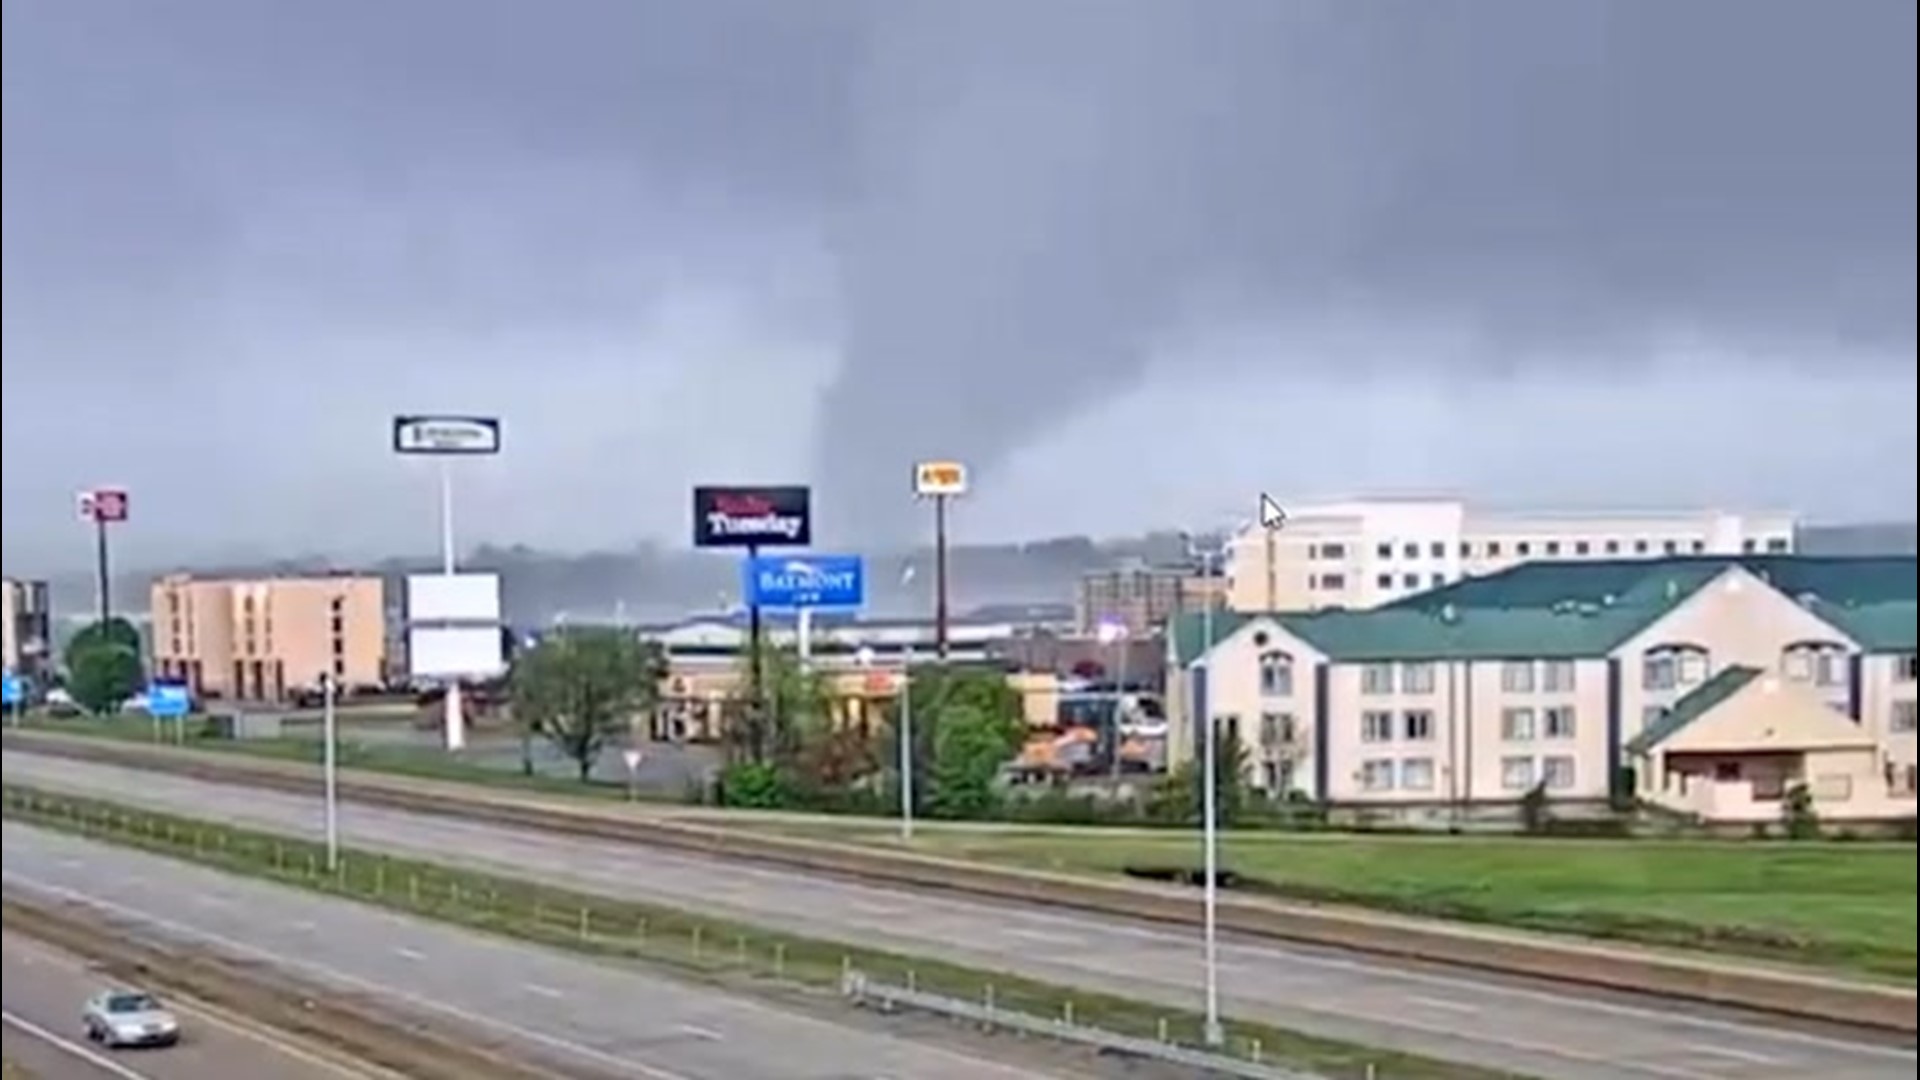 As severe weather rocked the central U.S. on Saturday, March 28, reports emerged of significant tornado damage in Jonesboro, Arkansas.